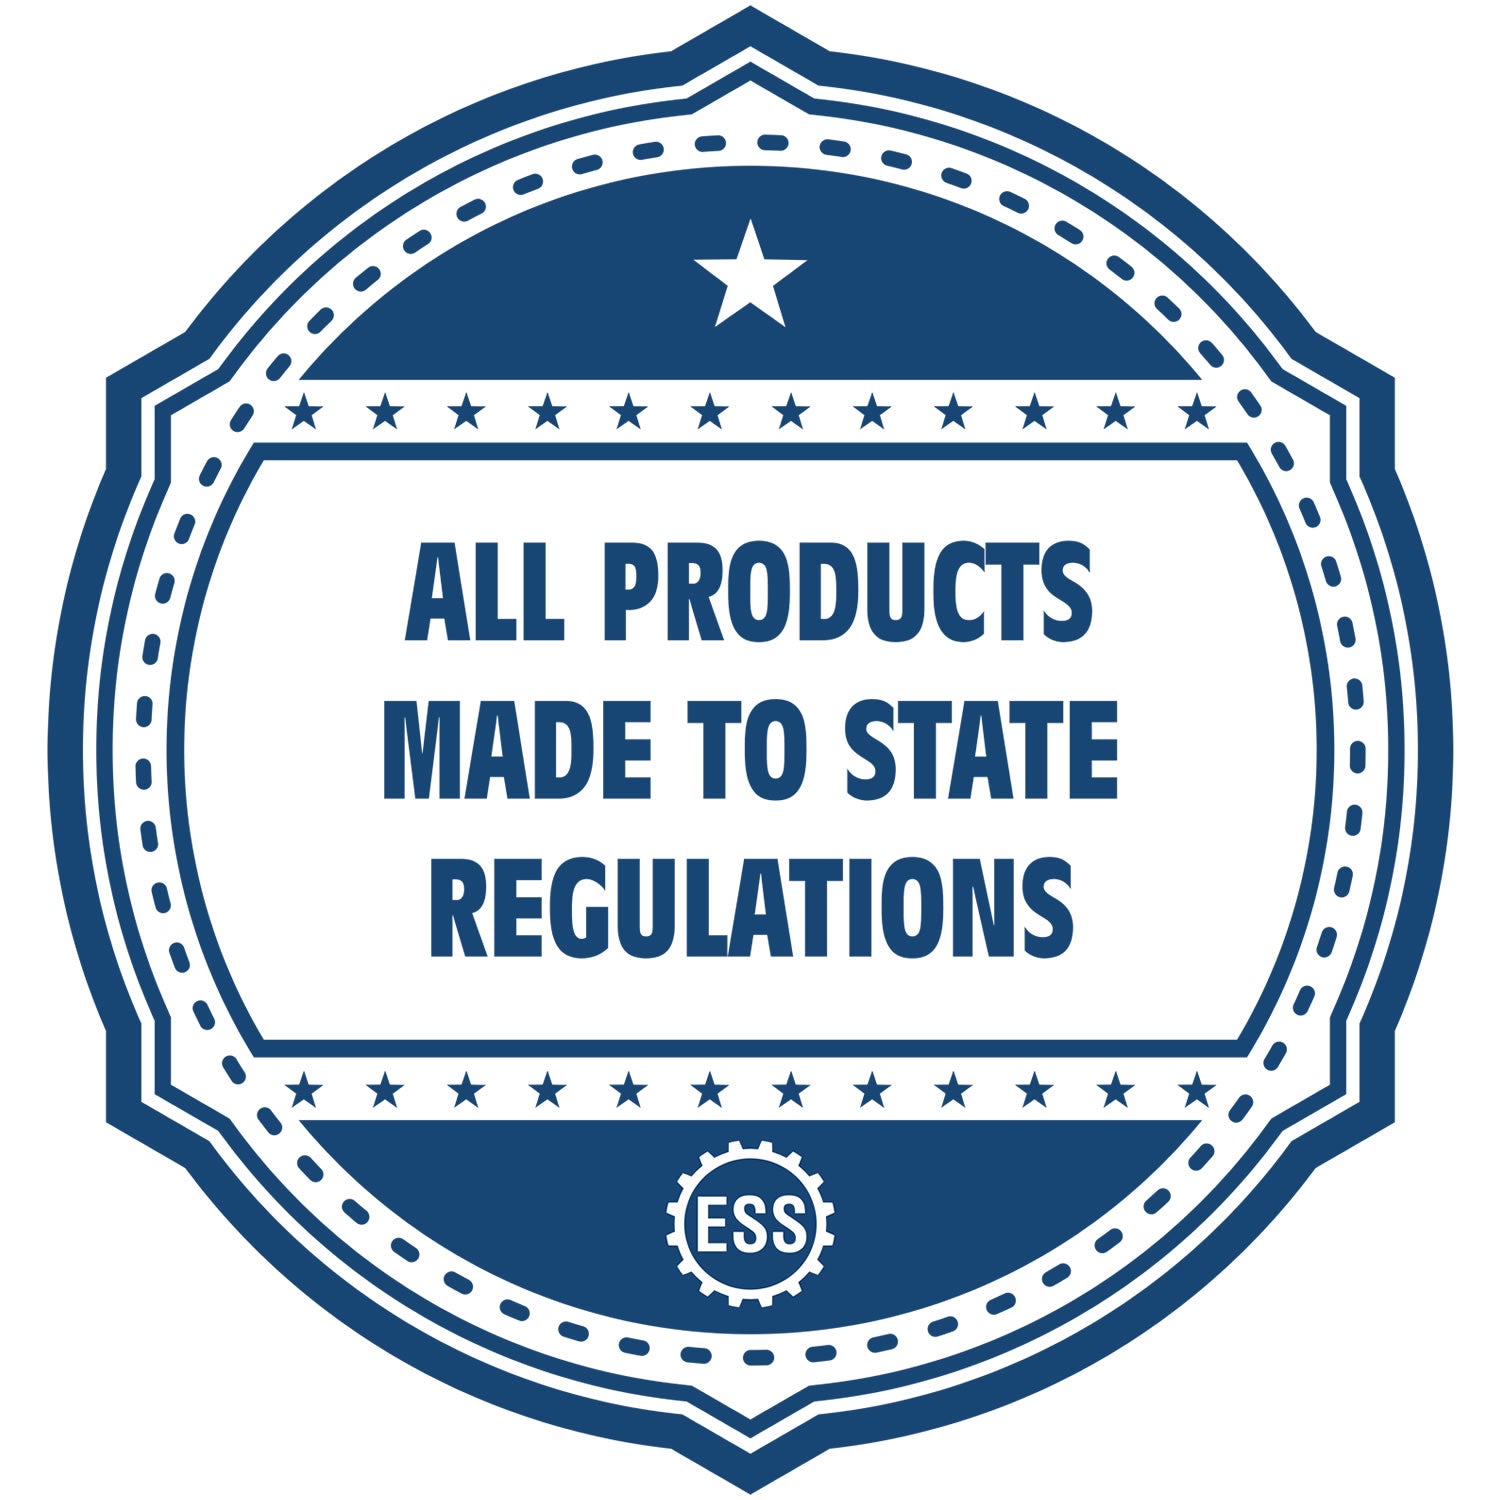 An icon or badge element for the Heavy Duty Cast Iron Virginia Land Surveyor Seal Embosser showing that this product is made in compliance with state regulations.